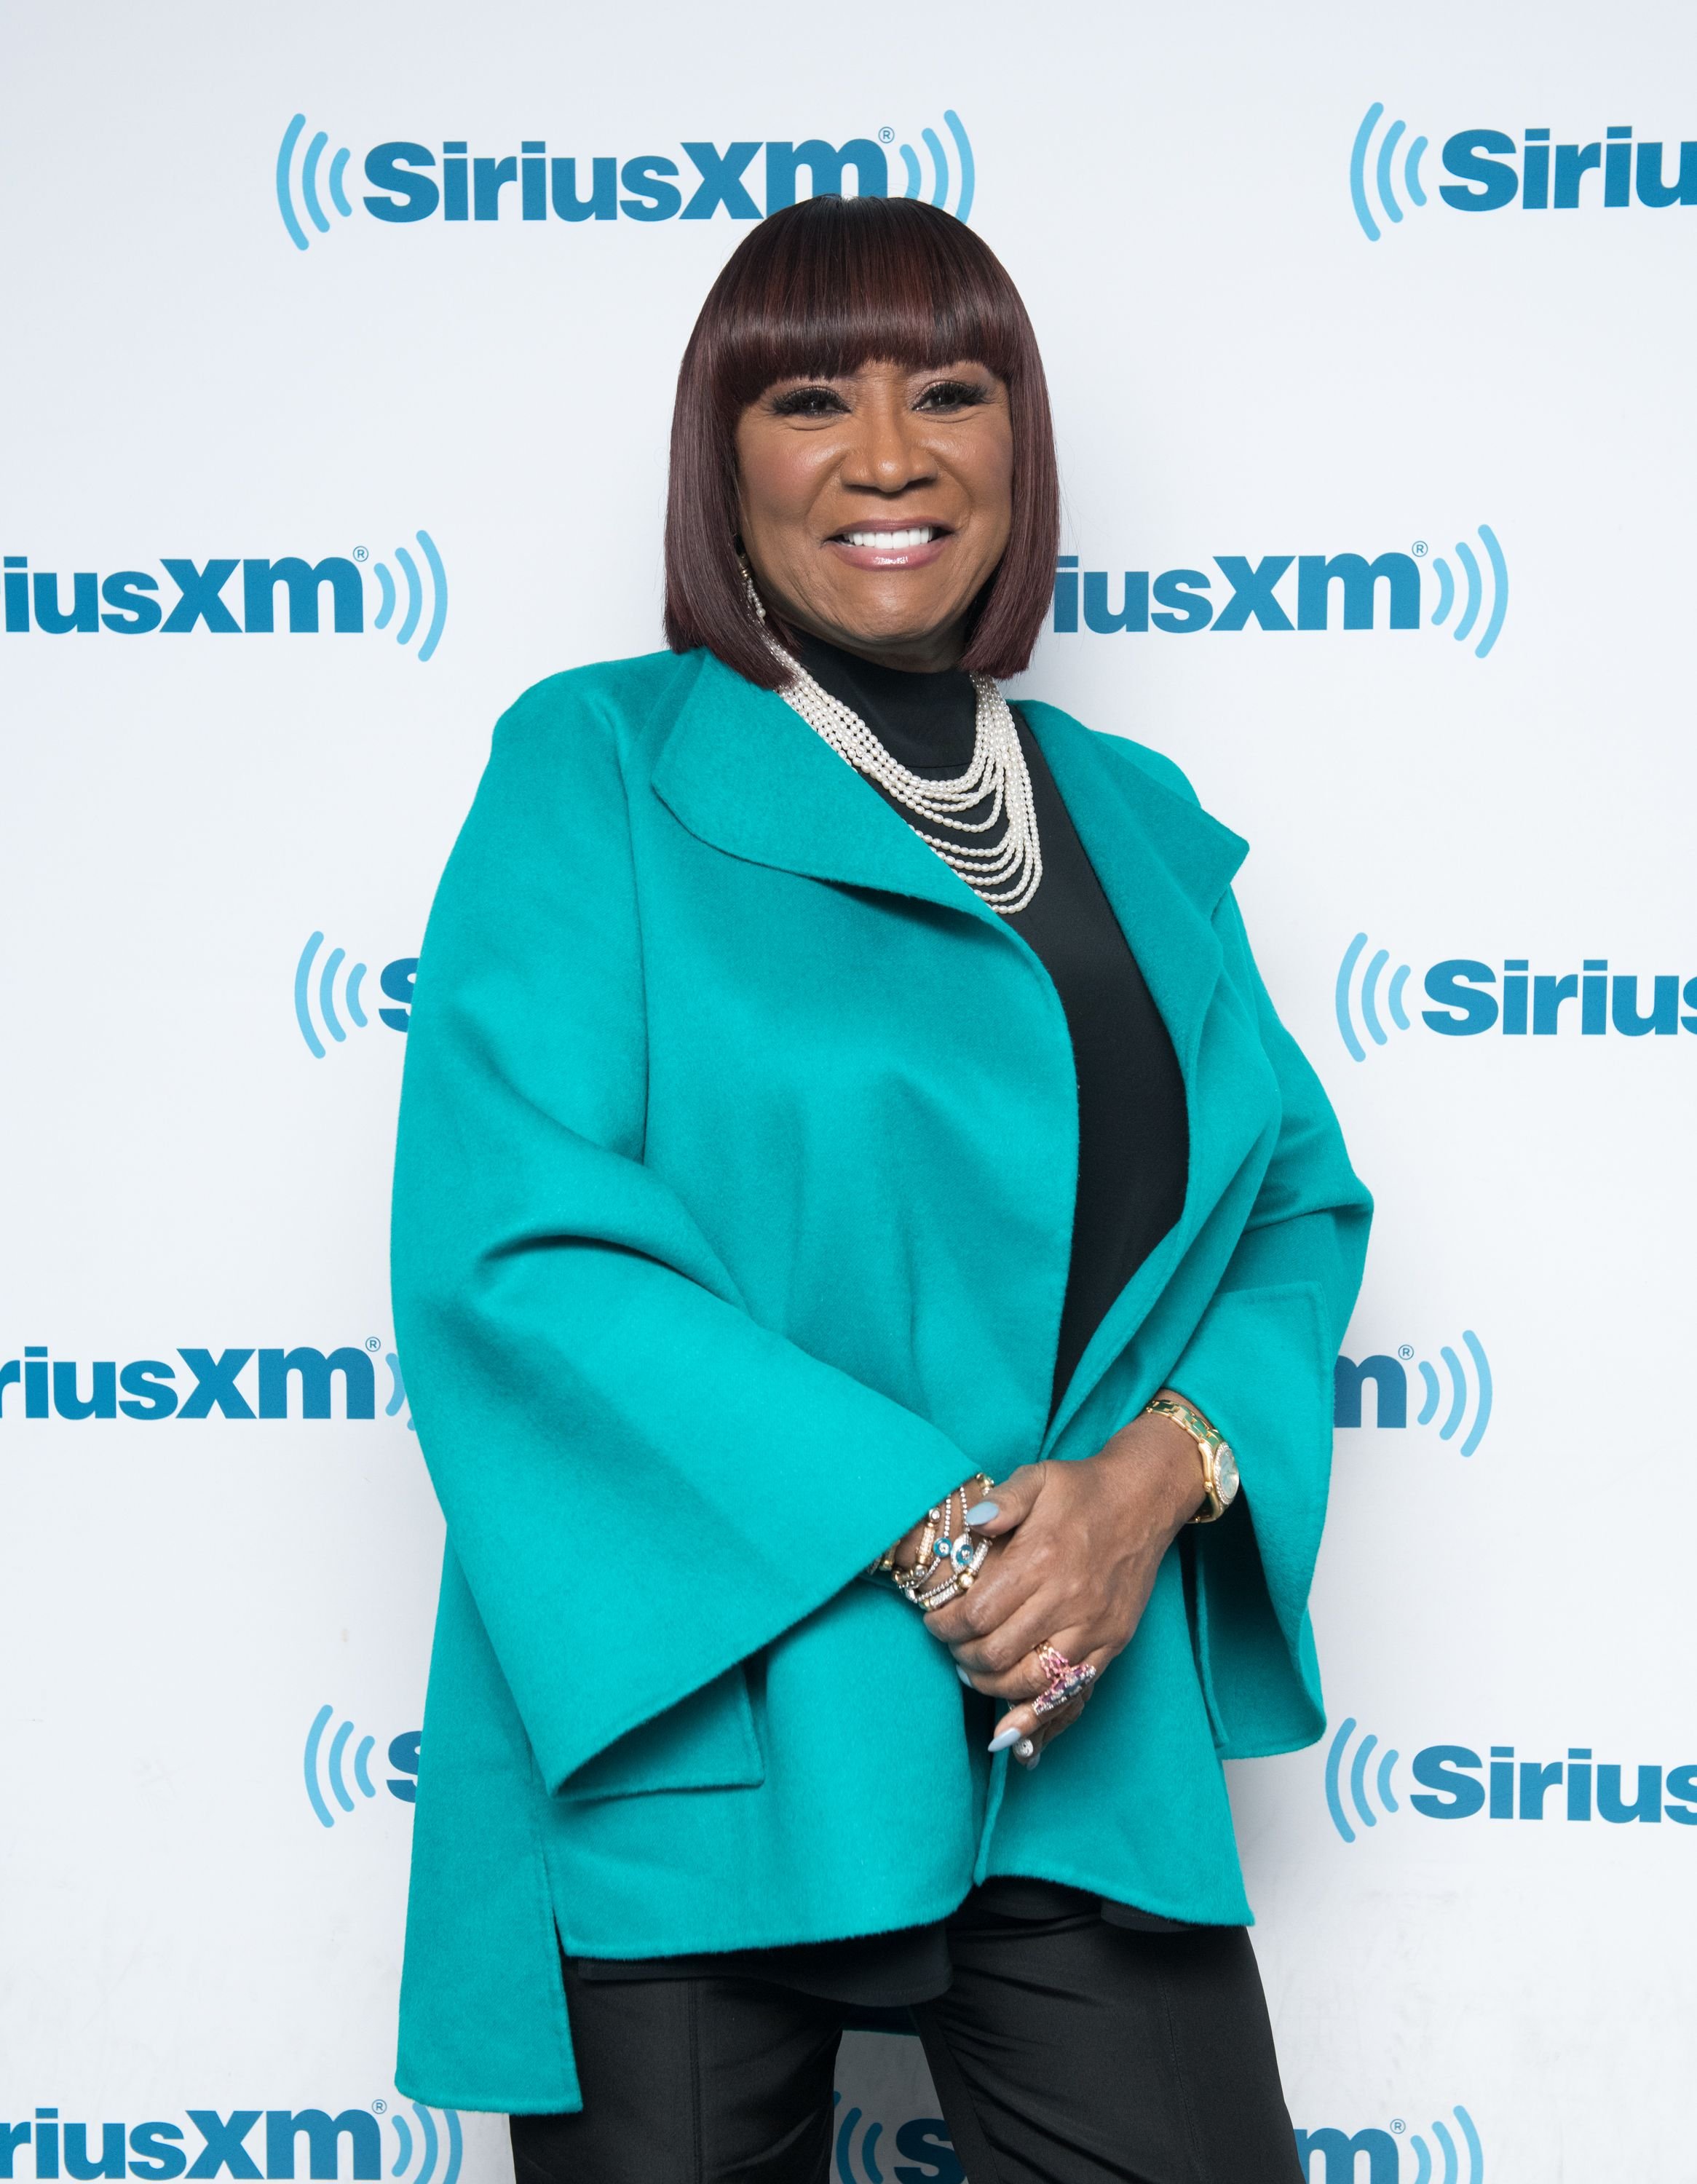 Patti LaBelle at the SiriusXM Studios on December 15, 2017 in New York. | Photo: Getty Images